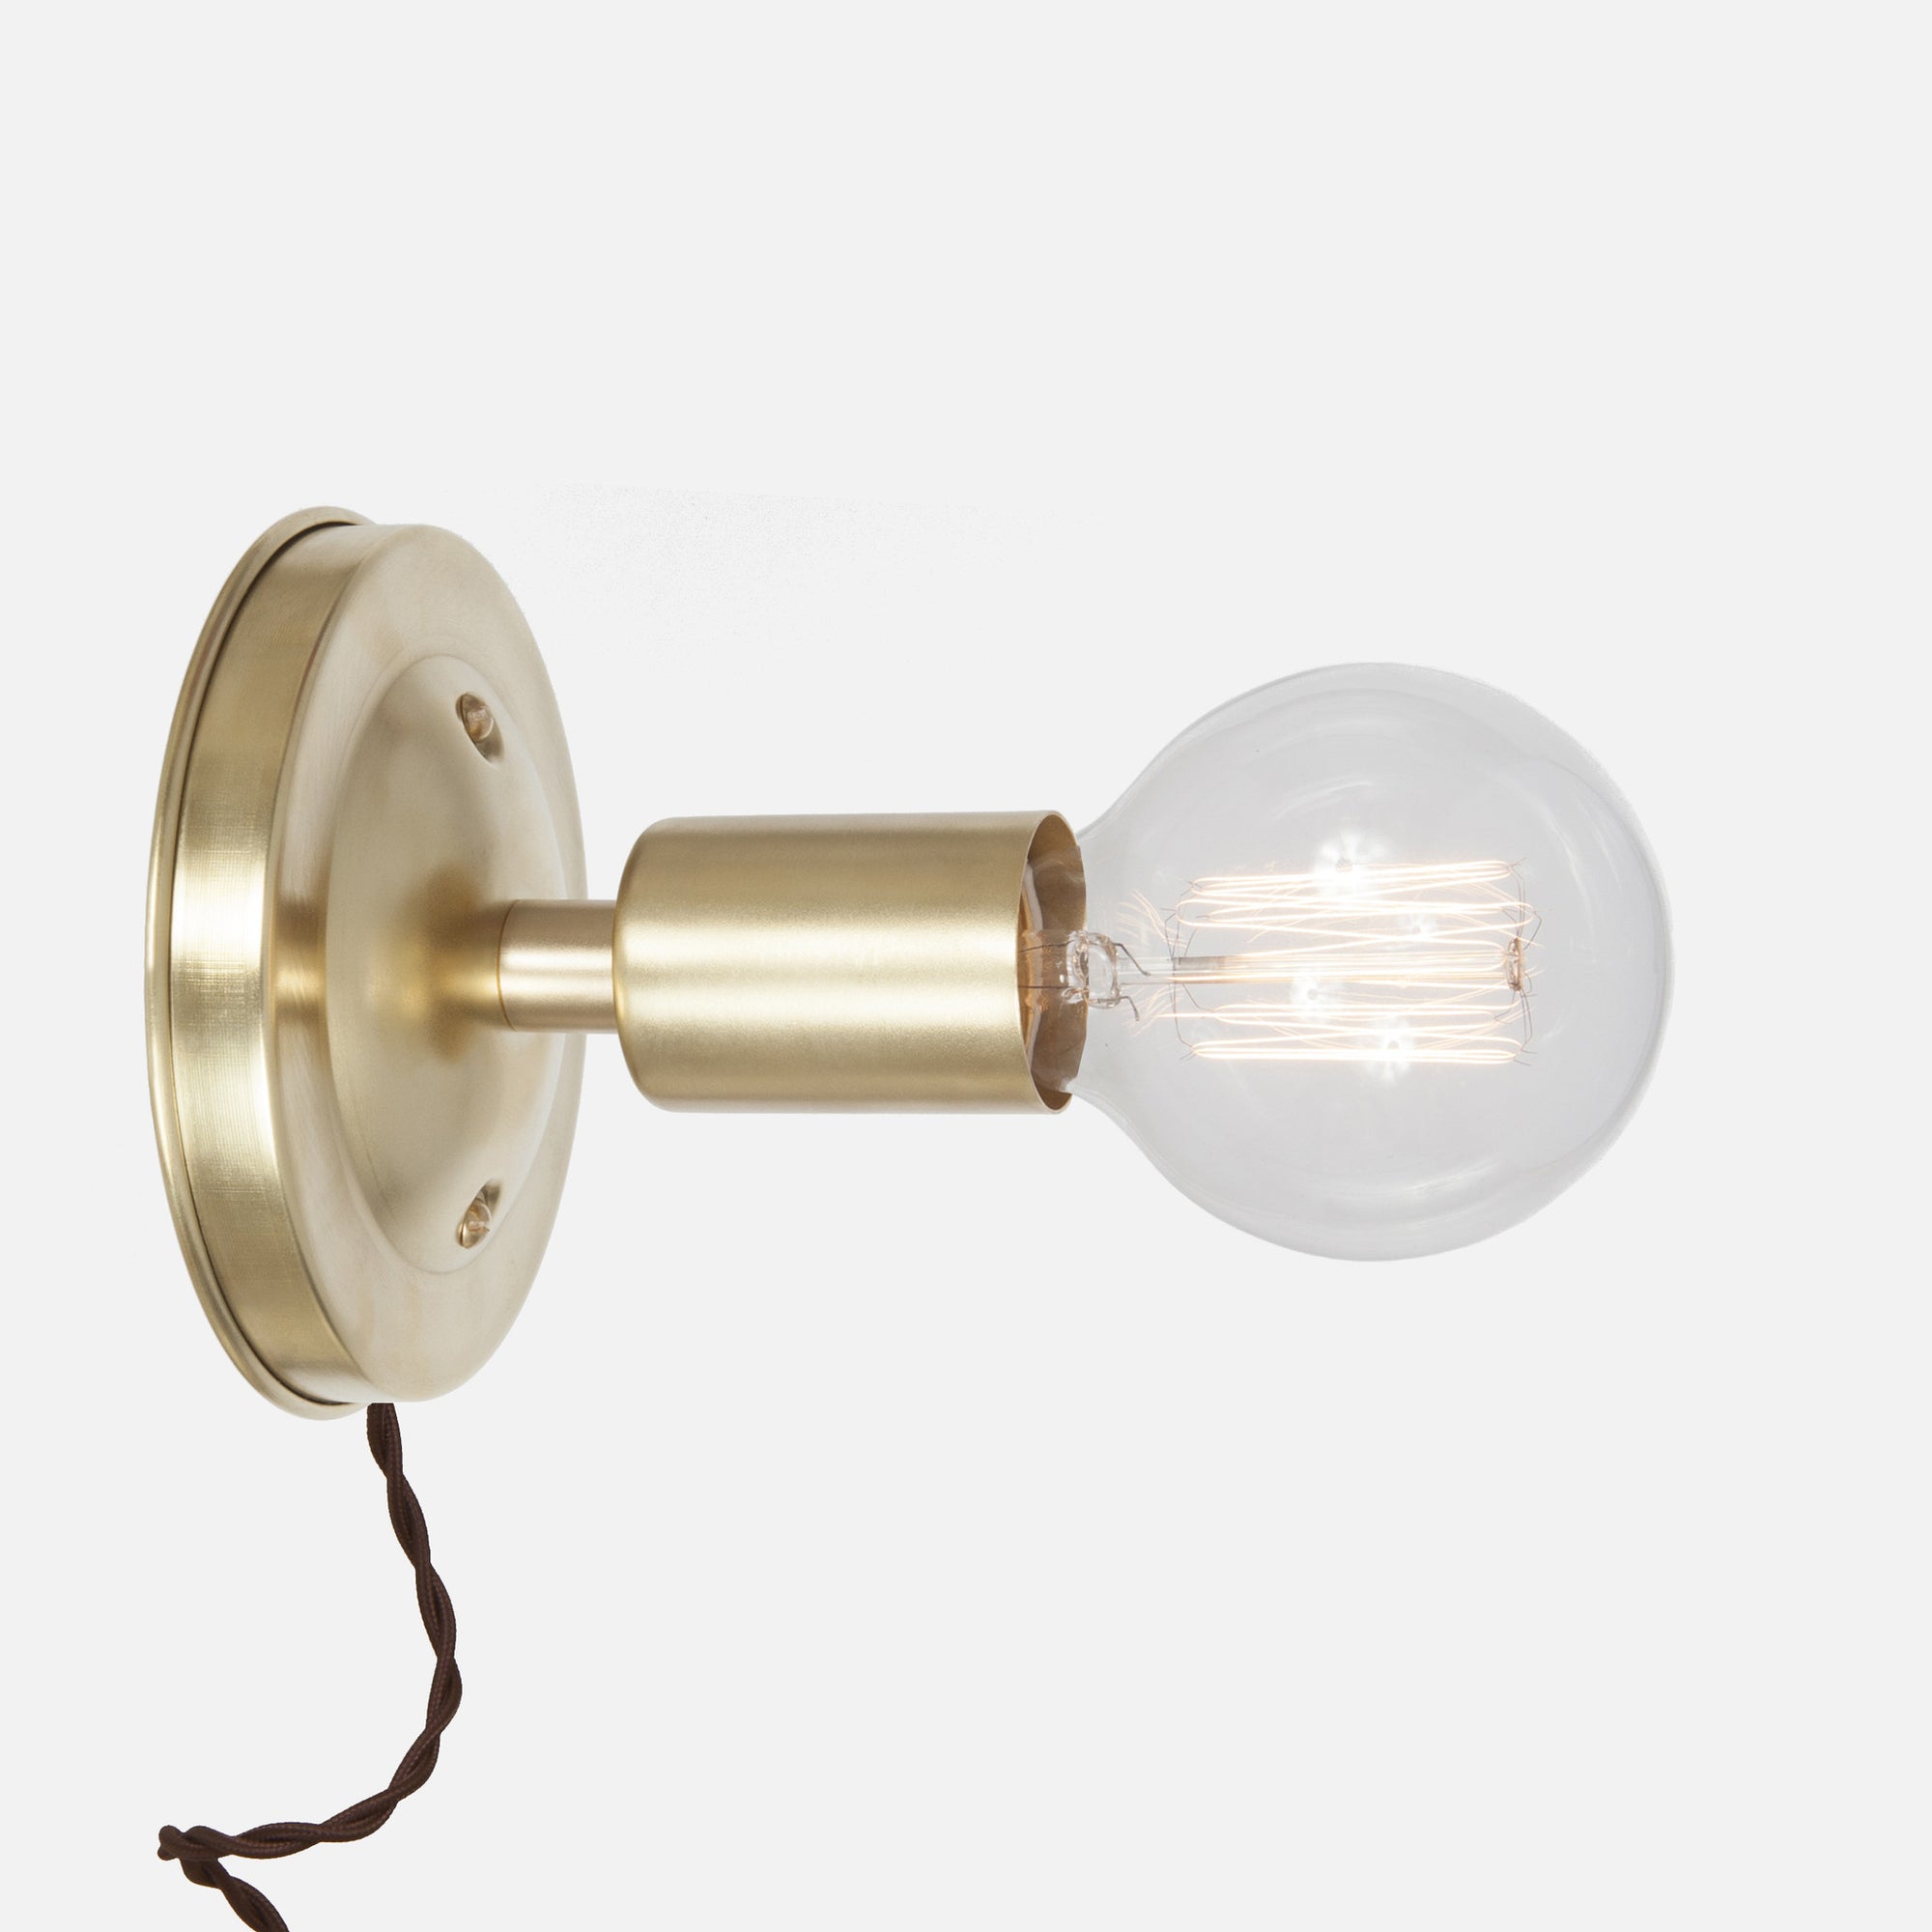 Bare Bulb Wall Sconce - Raw Brass - Plug-In